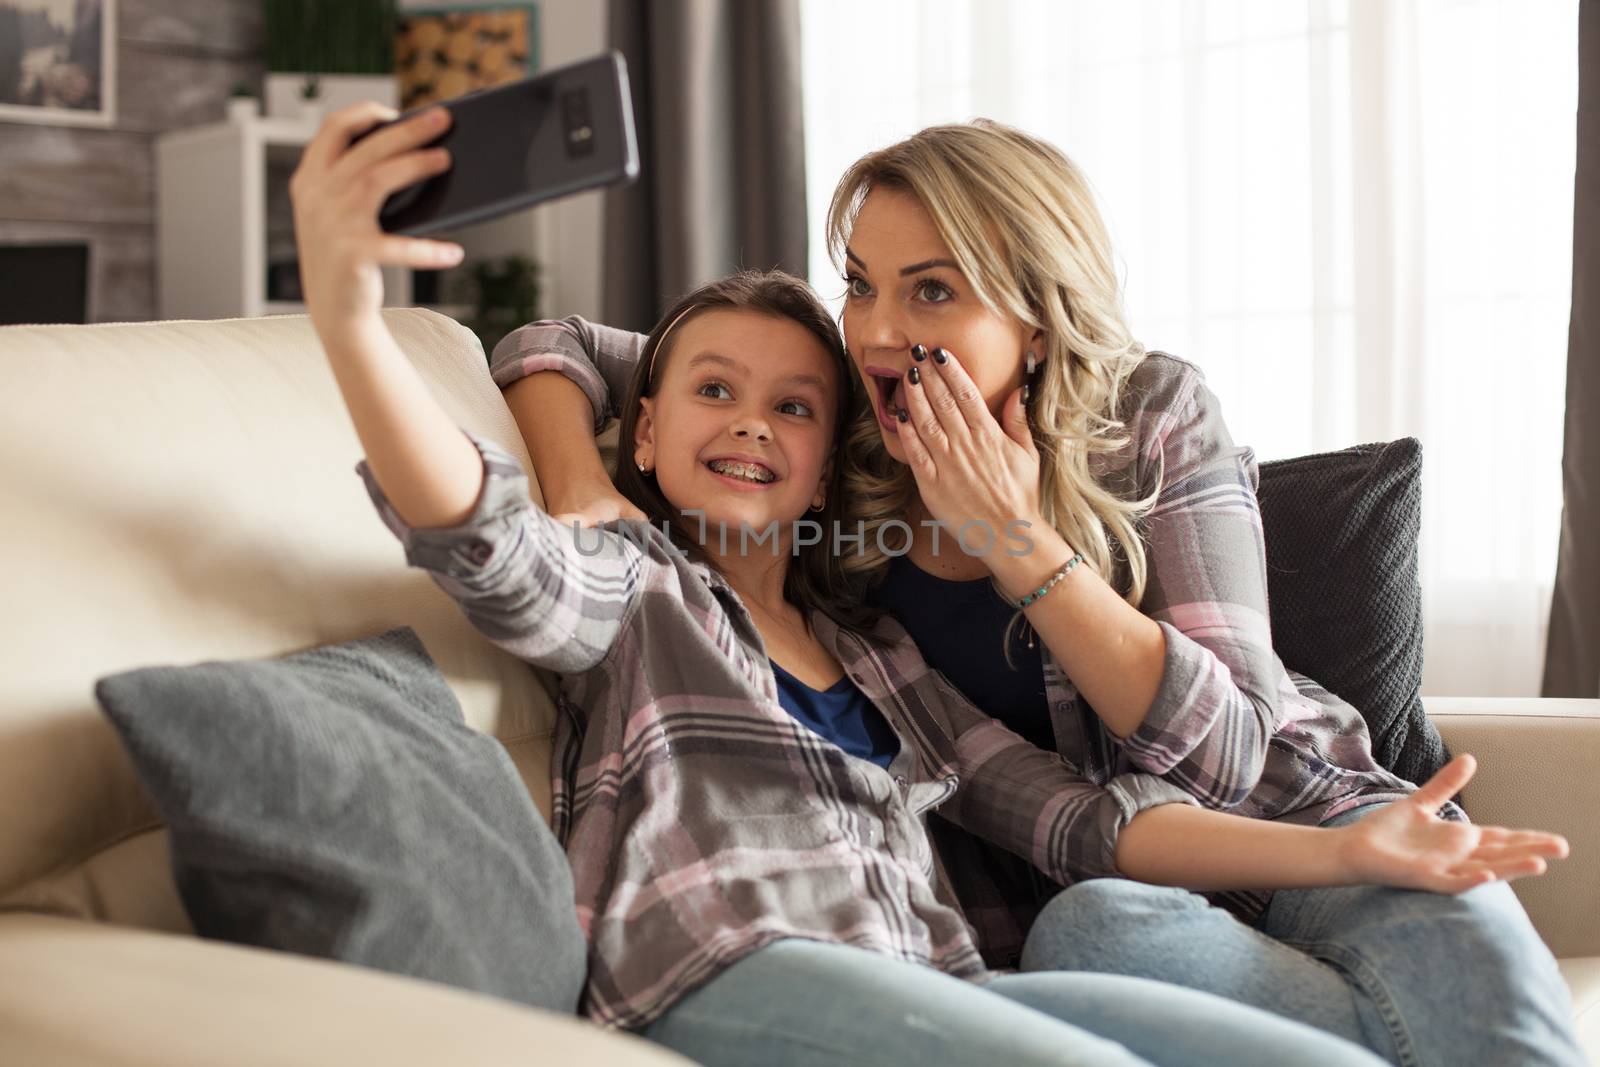 Cheerful kid and her mother are taking a selfie in living room sitting on the couch having a good time.